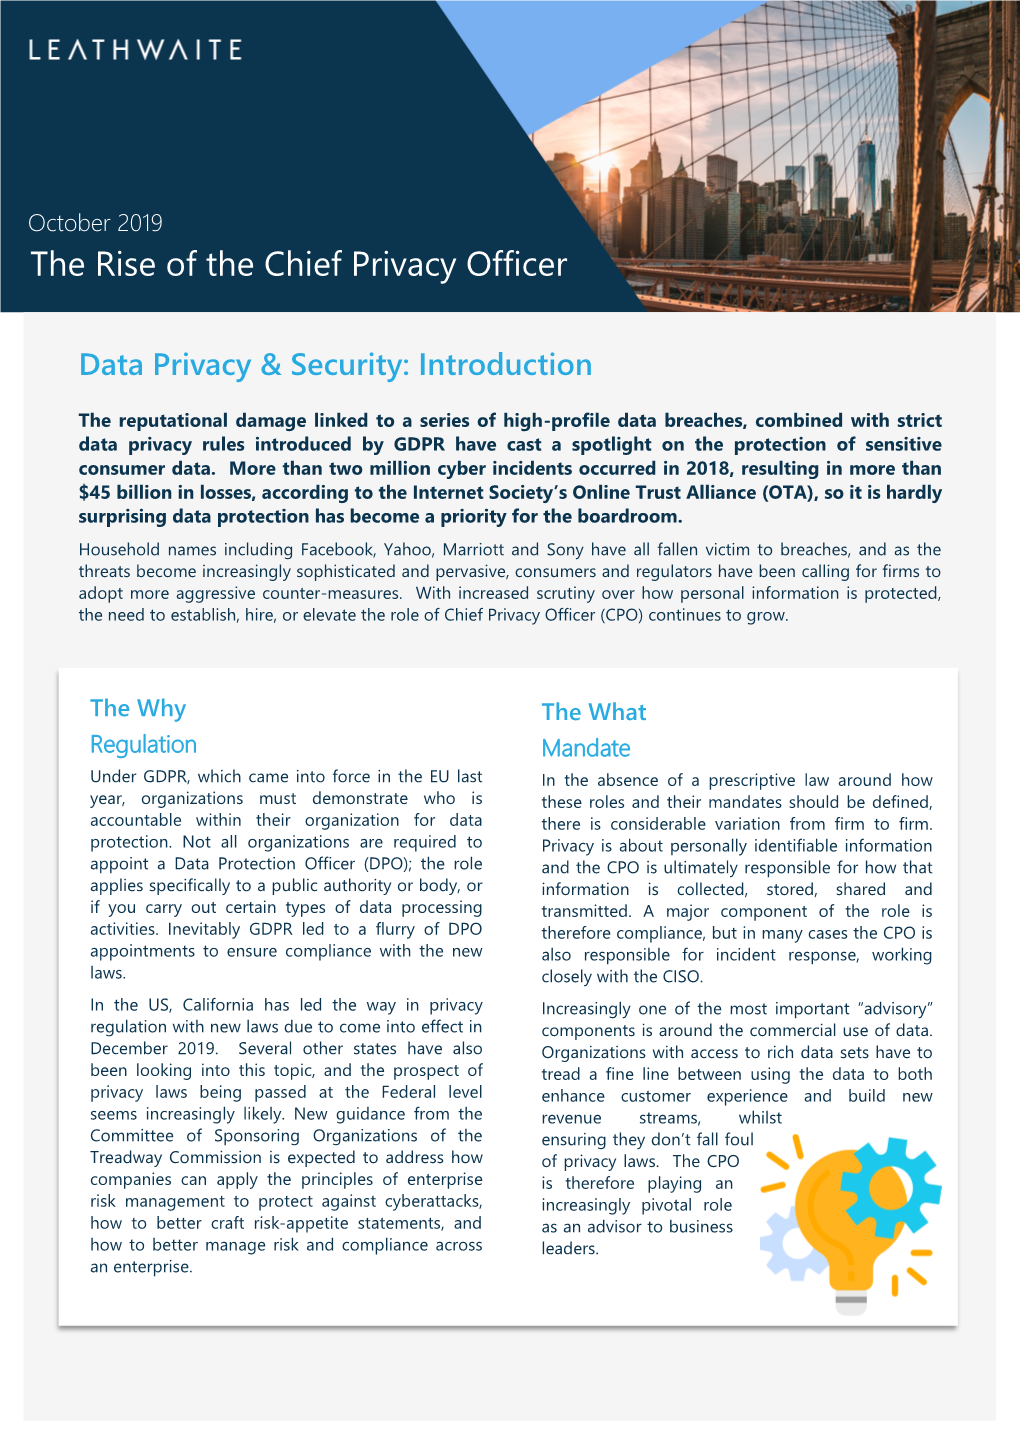 The Rise of the Chief Privacy Officer